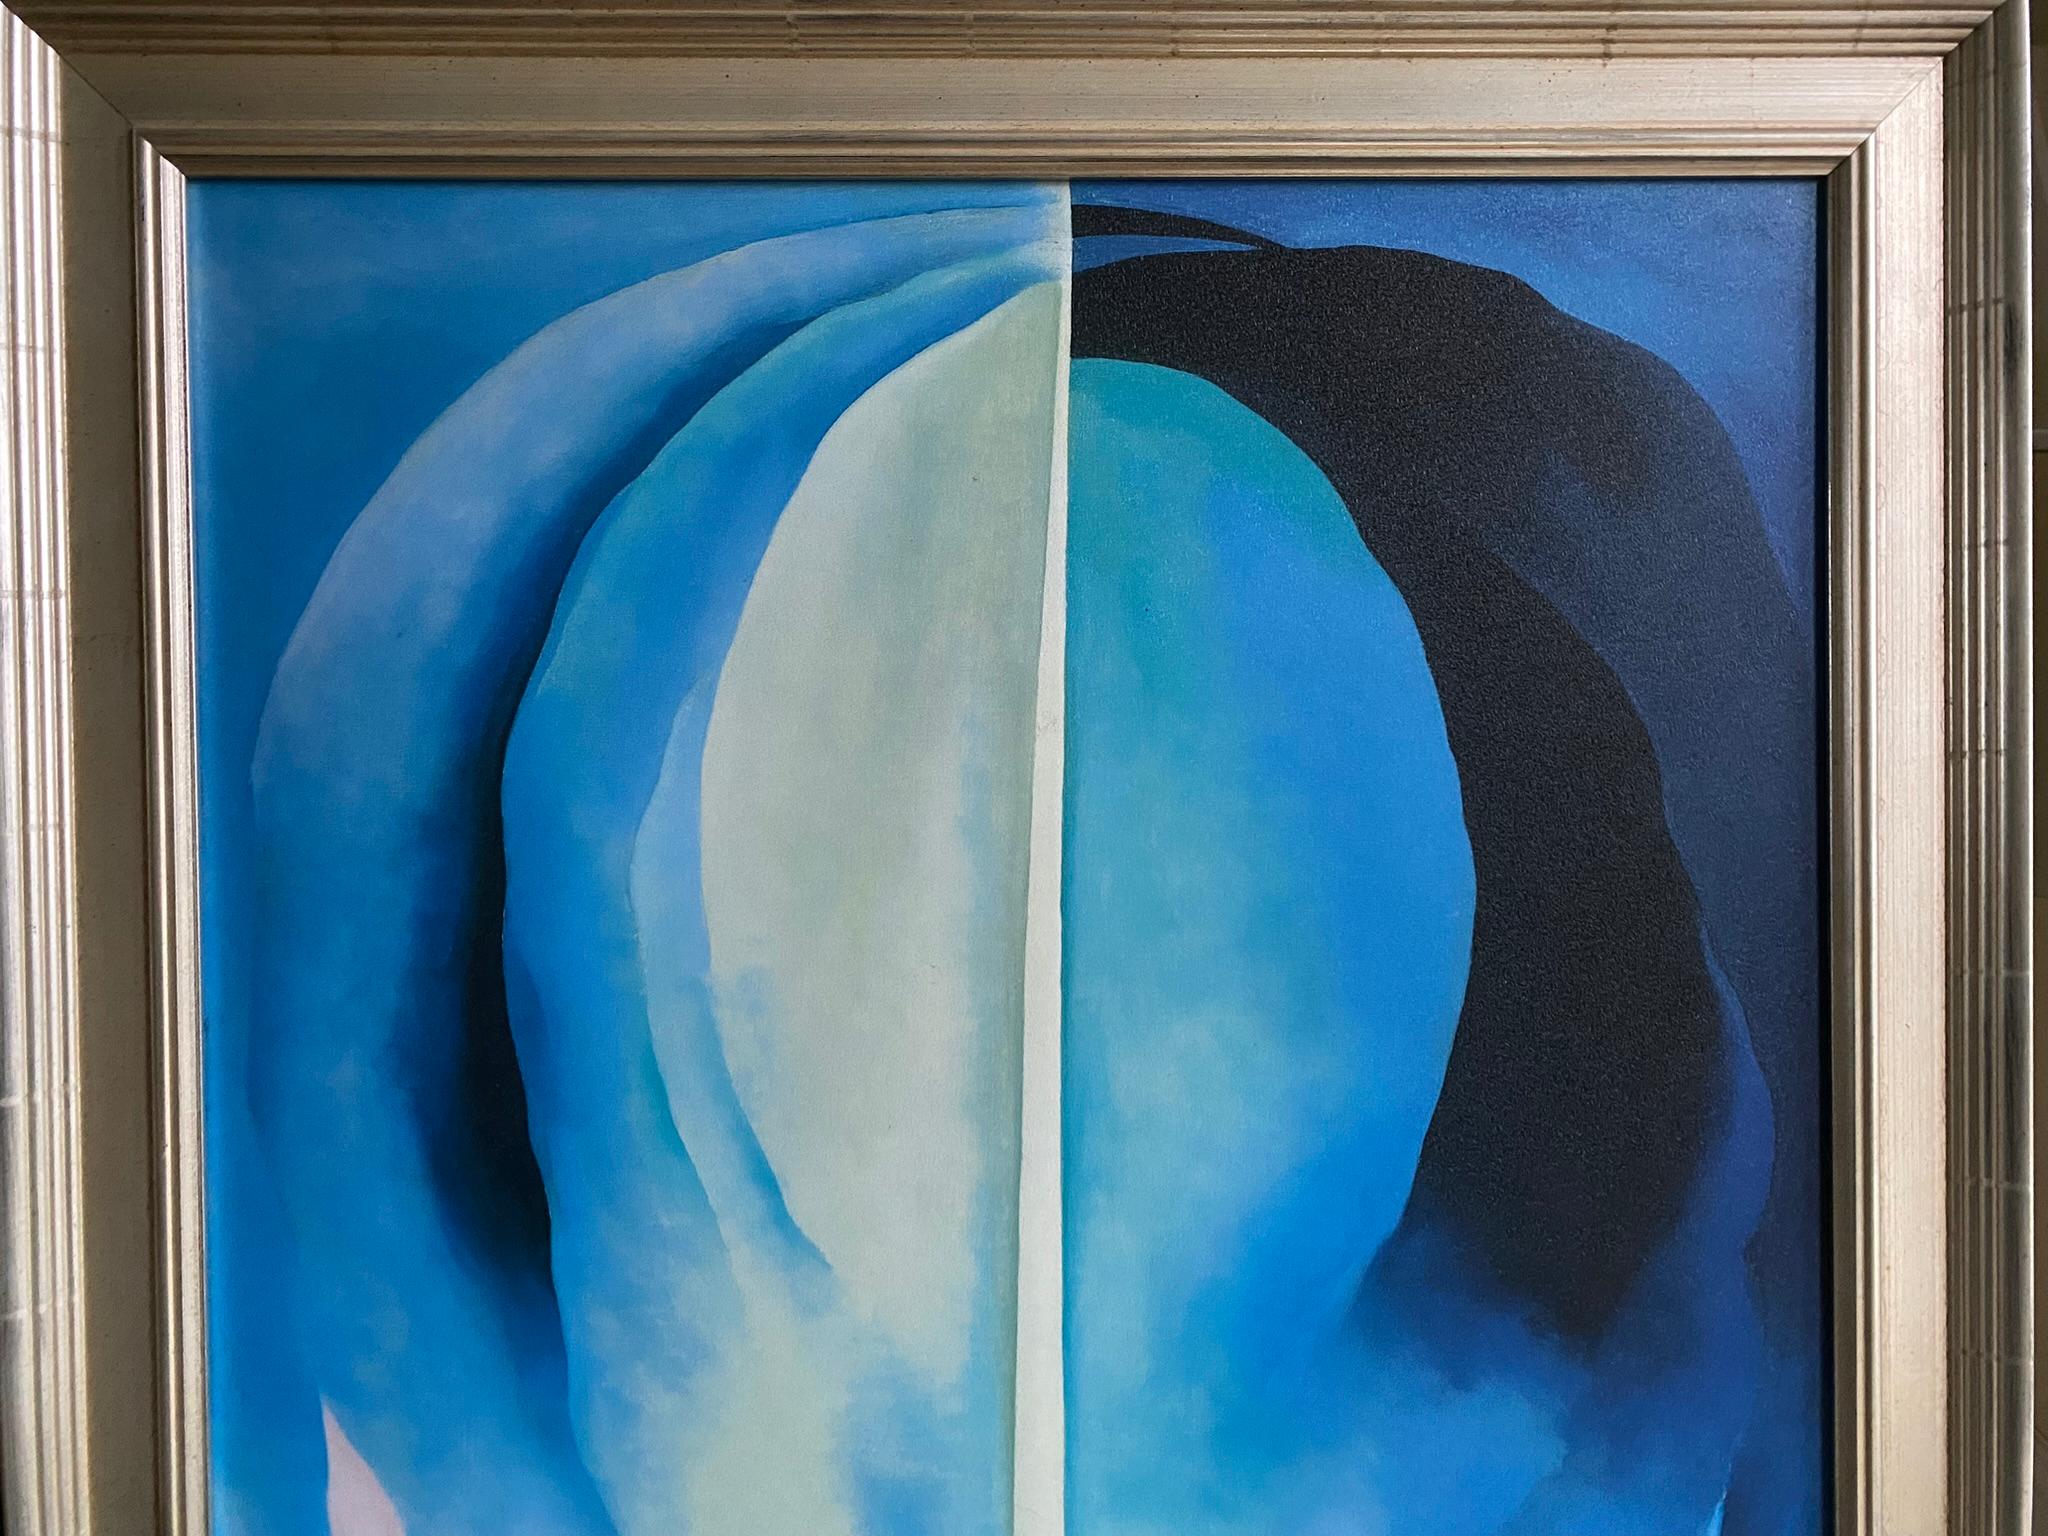 Georgia O'Keeffe-High Quality print by MoMA circa1997-Abstraction Blue-GSYStudio For Sale 7